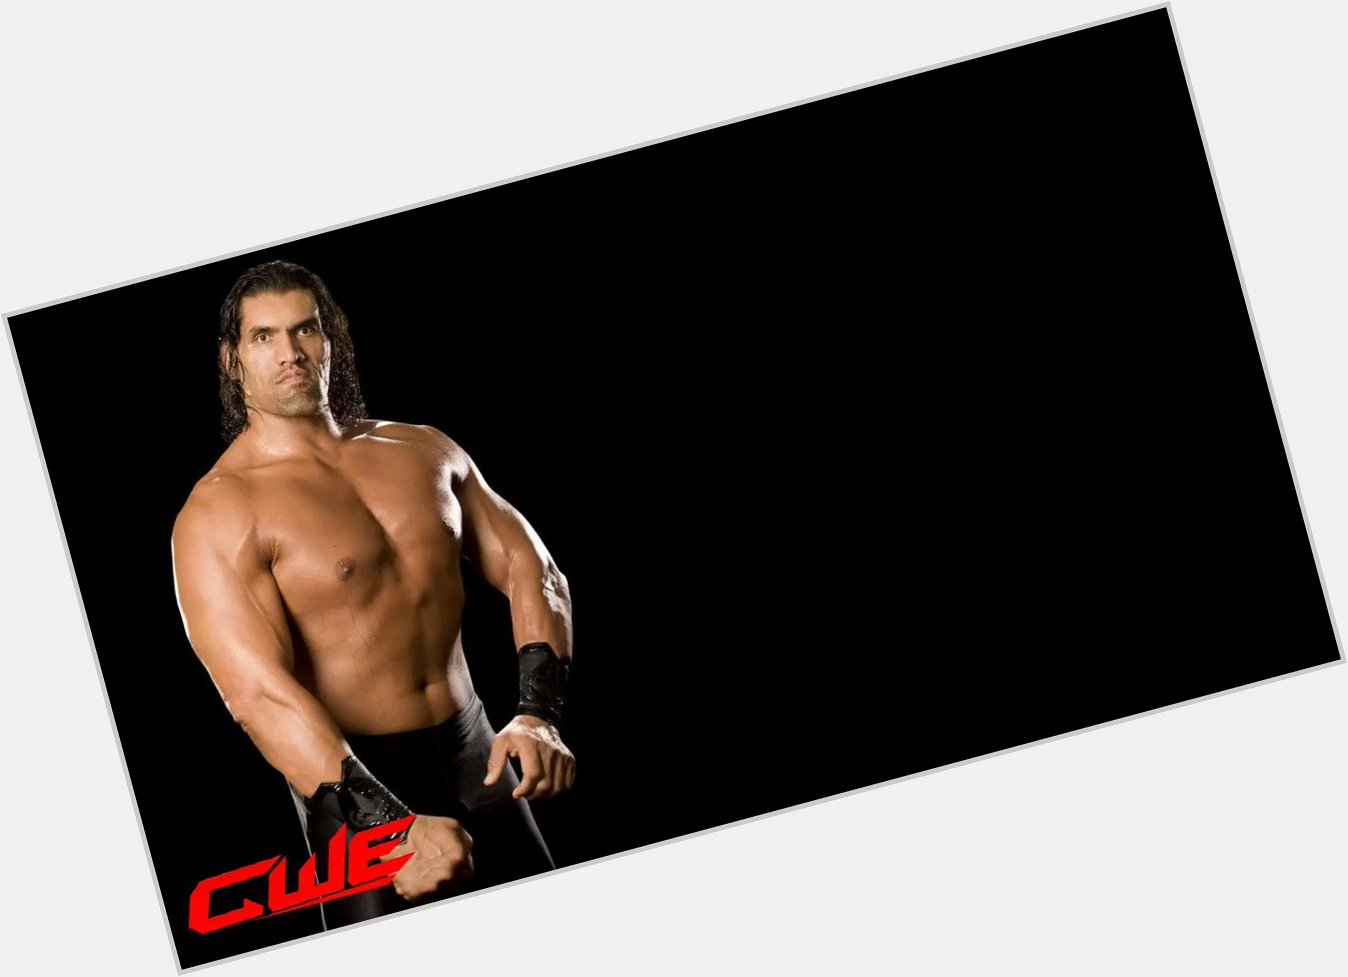 CWE family wishing a very happy birthday to the legendary The Great Khali 